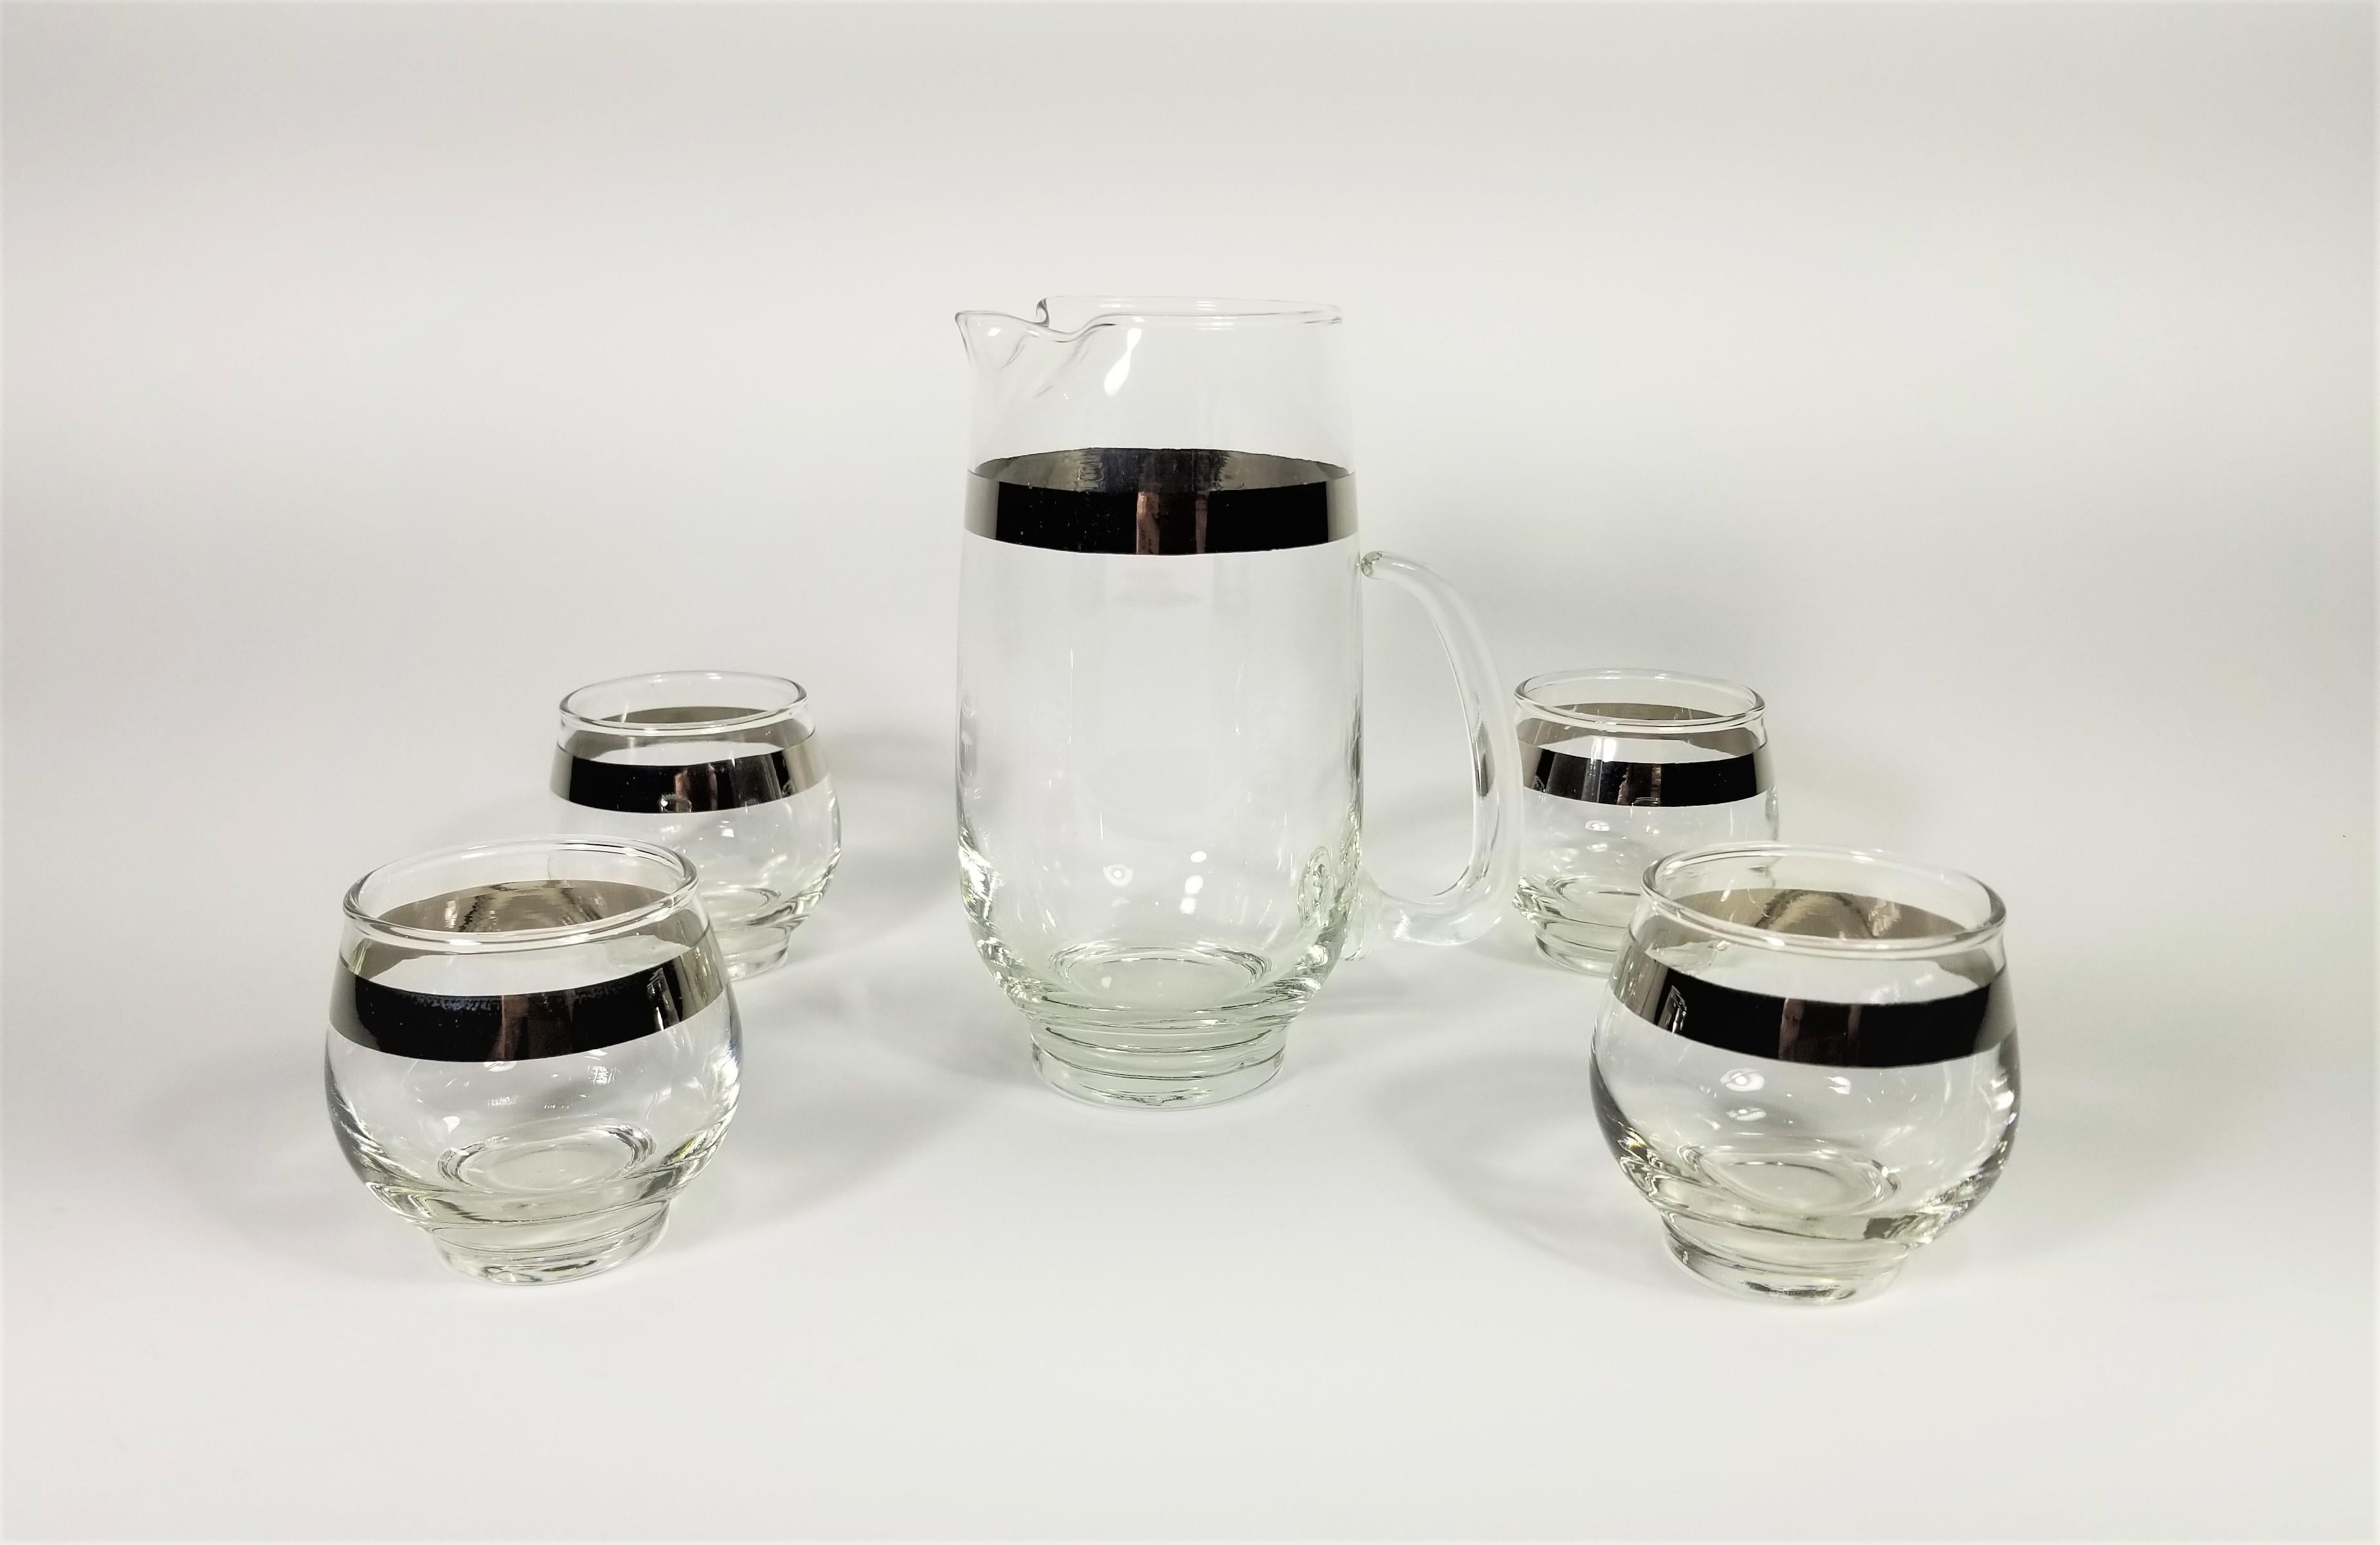 Libbey Martini Set Glassware Barware Mid Century 1960s In Excellent Condition For Sale In New York, NY